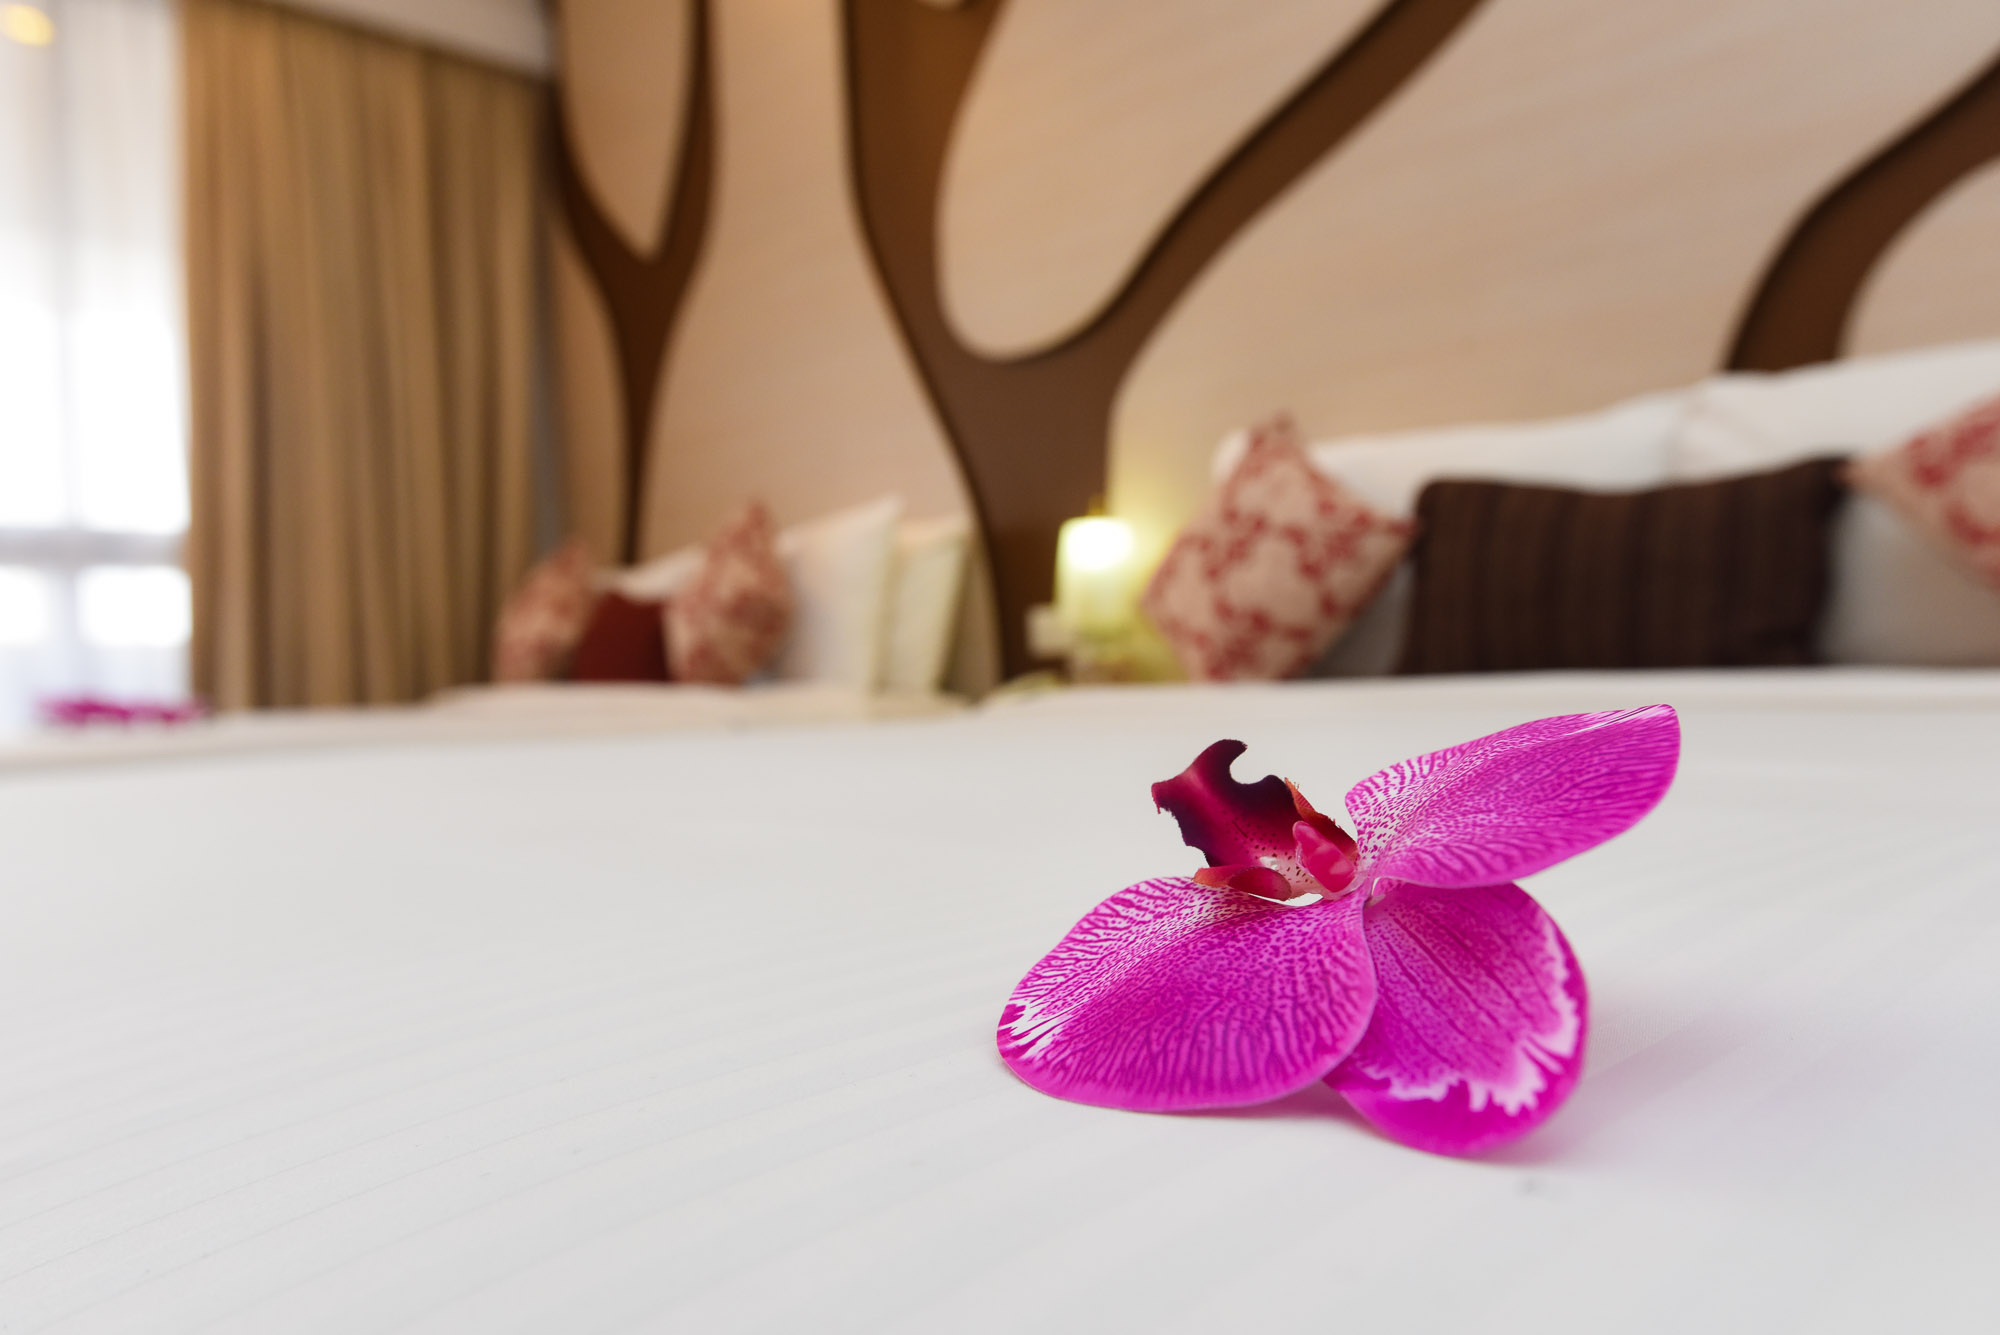 Pamper yourself in this wood themed Wood Suite. Let yourself be blown away by the comfort with the room design, comes equipped with necessities such as air-conditioning, satellite television, complimentary WiFi, in-room safe, hair dryer and much more.